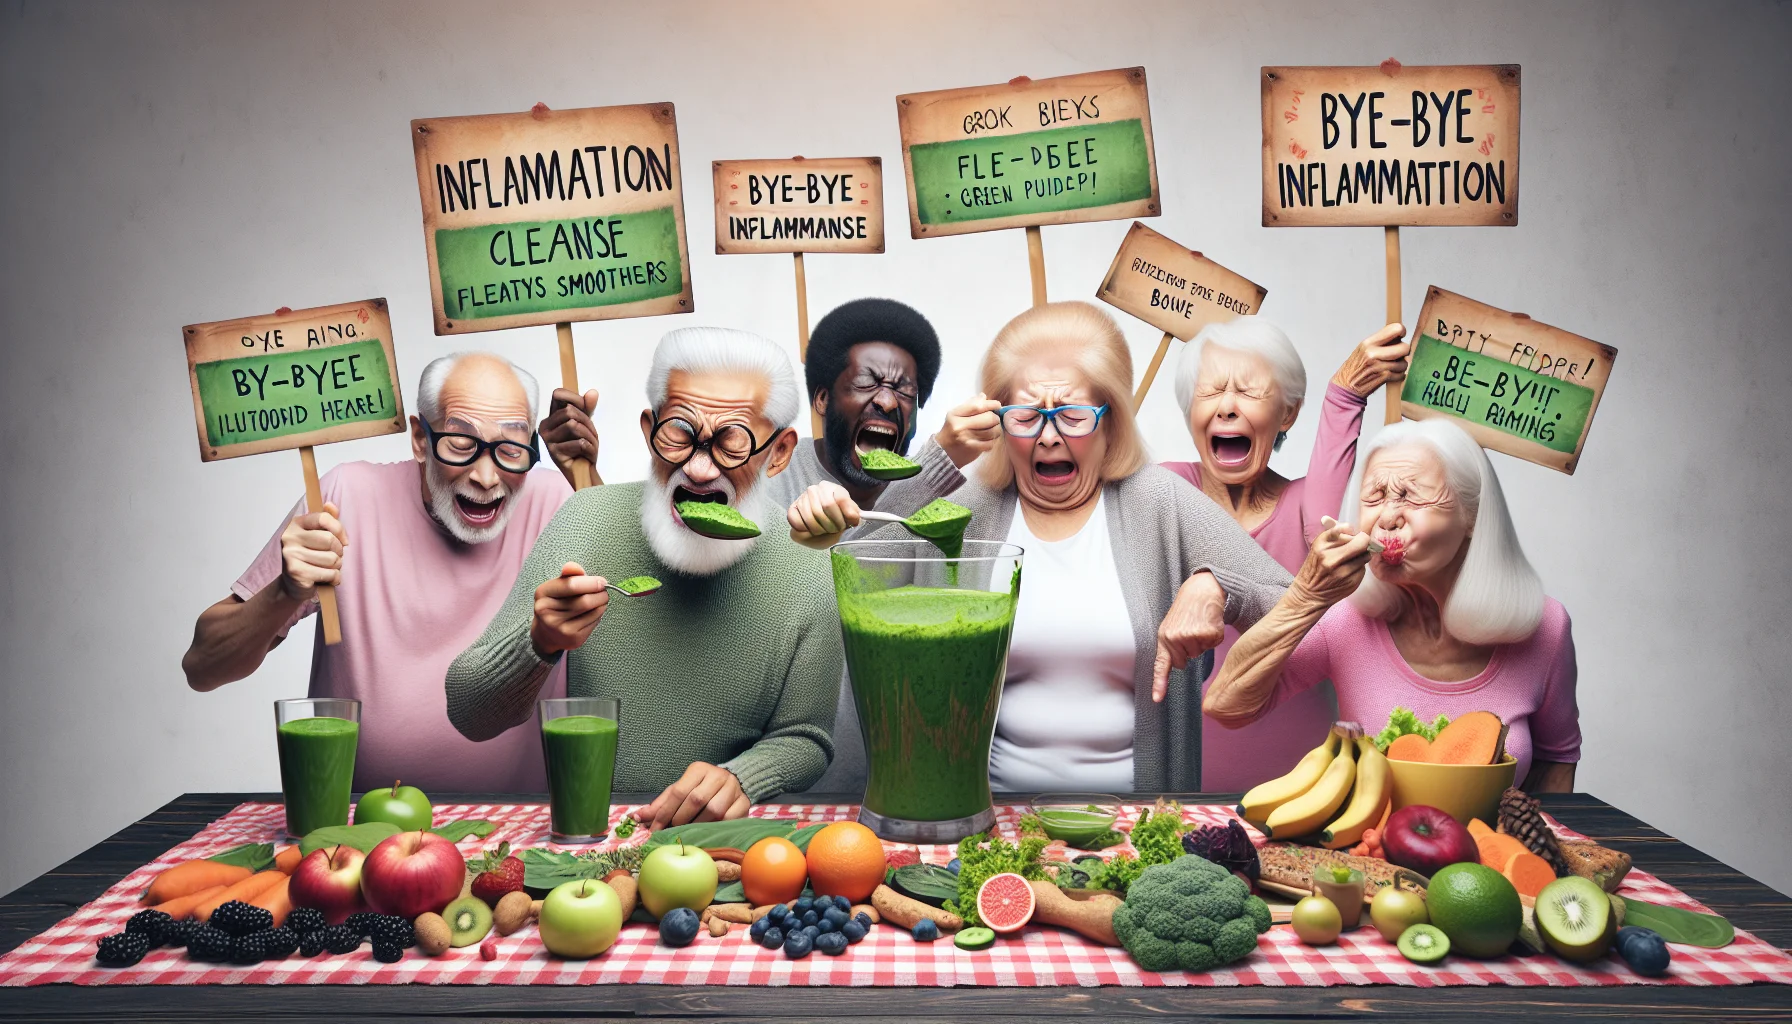 Create a humorous, realistic scene depicting a group of elderly individuals enthusiastically participating in an 'inflammation cleanse' diet. The scene could feature a lively South Asian man humorously struggling to gulp down a green, leafy smoothie with a large spoon, while a Caucasian woman, rosy-cheeked with amusement, is trying to decipher the complex ingredients of a health bar. Another scene could be of a Black woman cheerily arranging a colorful variety of fruits and vegetables, each marked with funny labels like 'bye-bye inflammation'. Incorporate humorous elements around the idea of healthy eating.